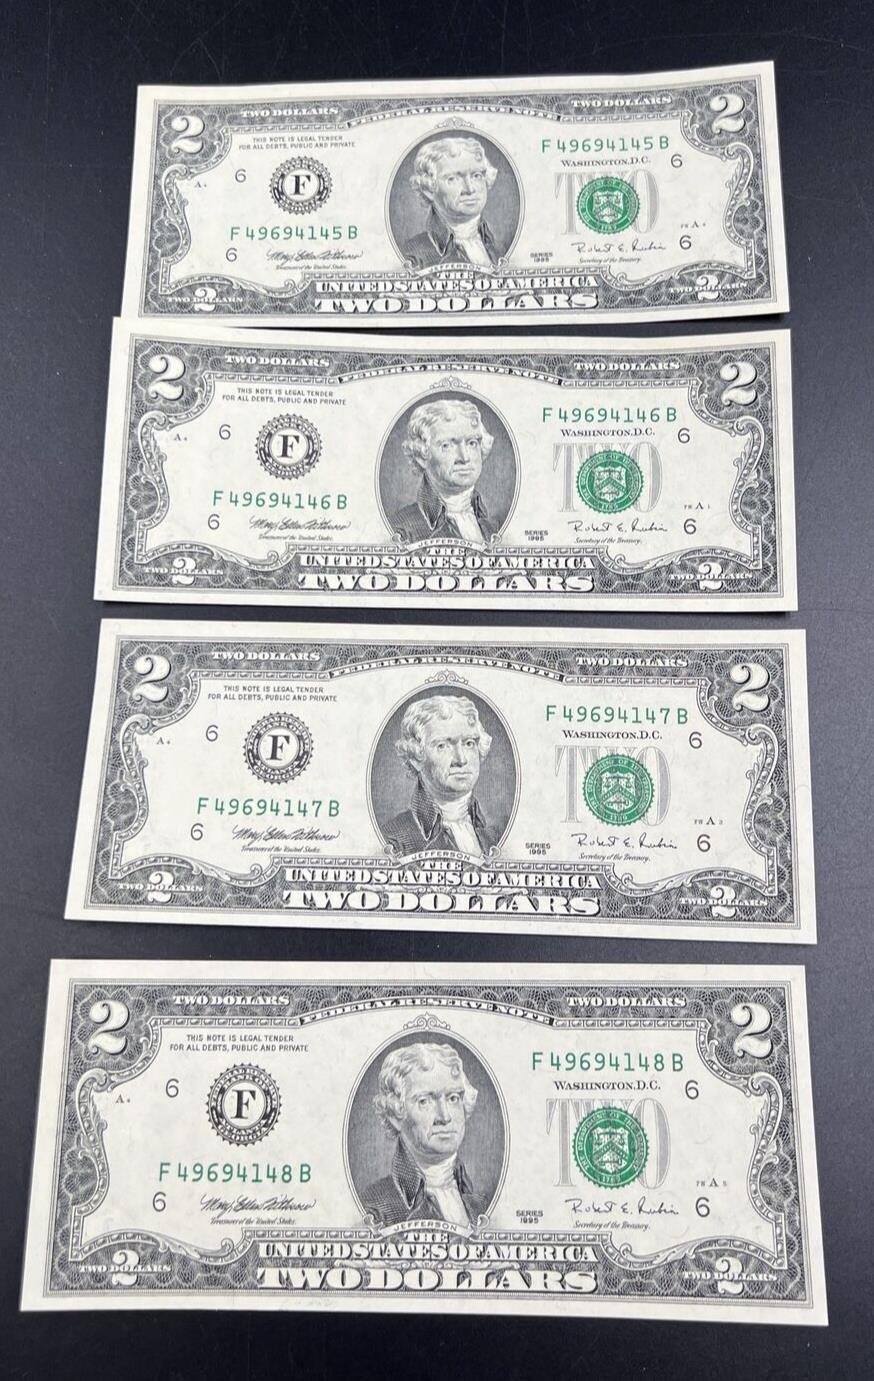 4 Consecutive 1995 $2 Two Dollar FRN Note Bills Choice UNC US Currency Banknotes